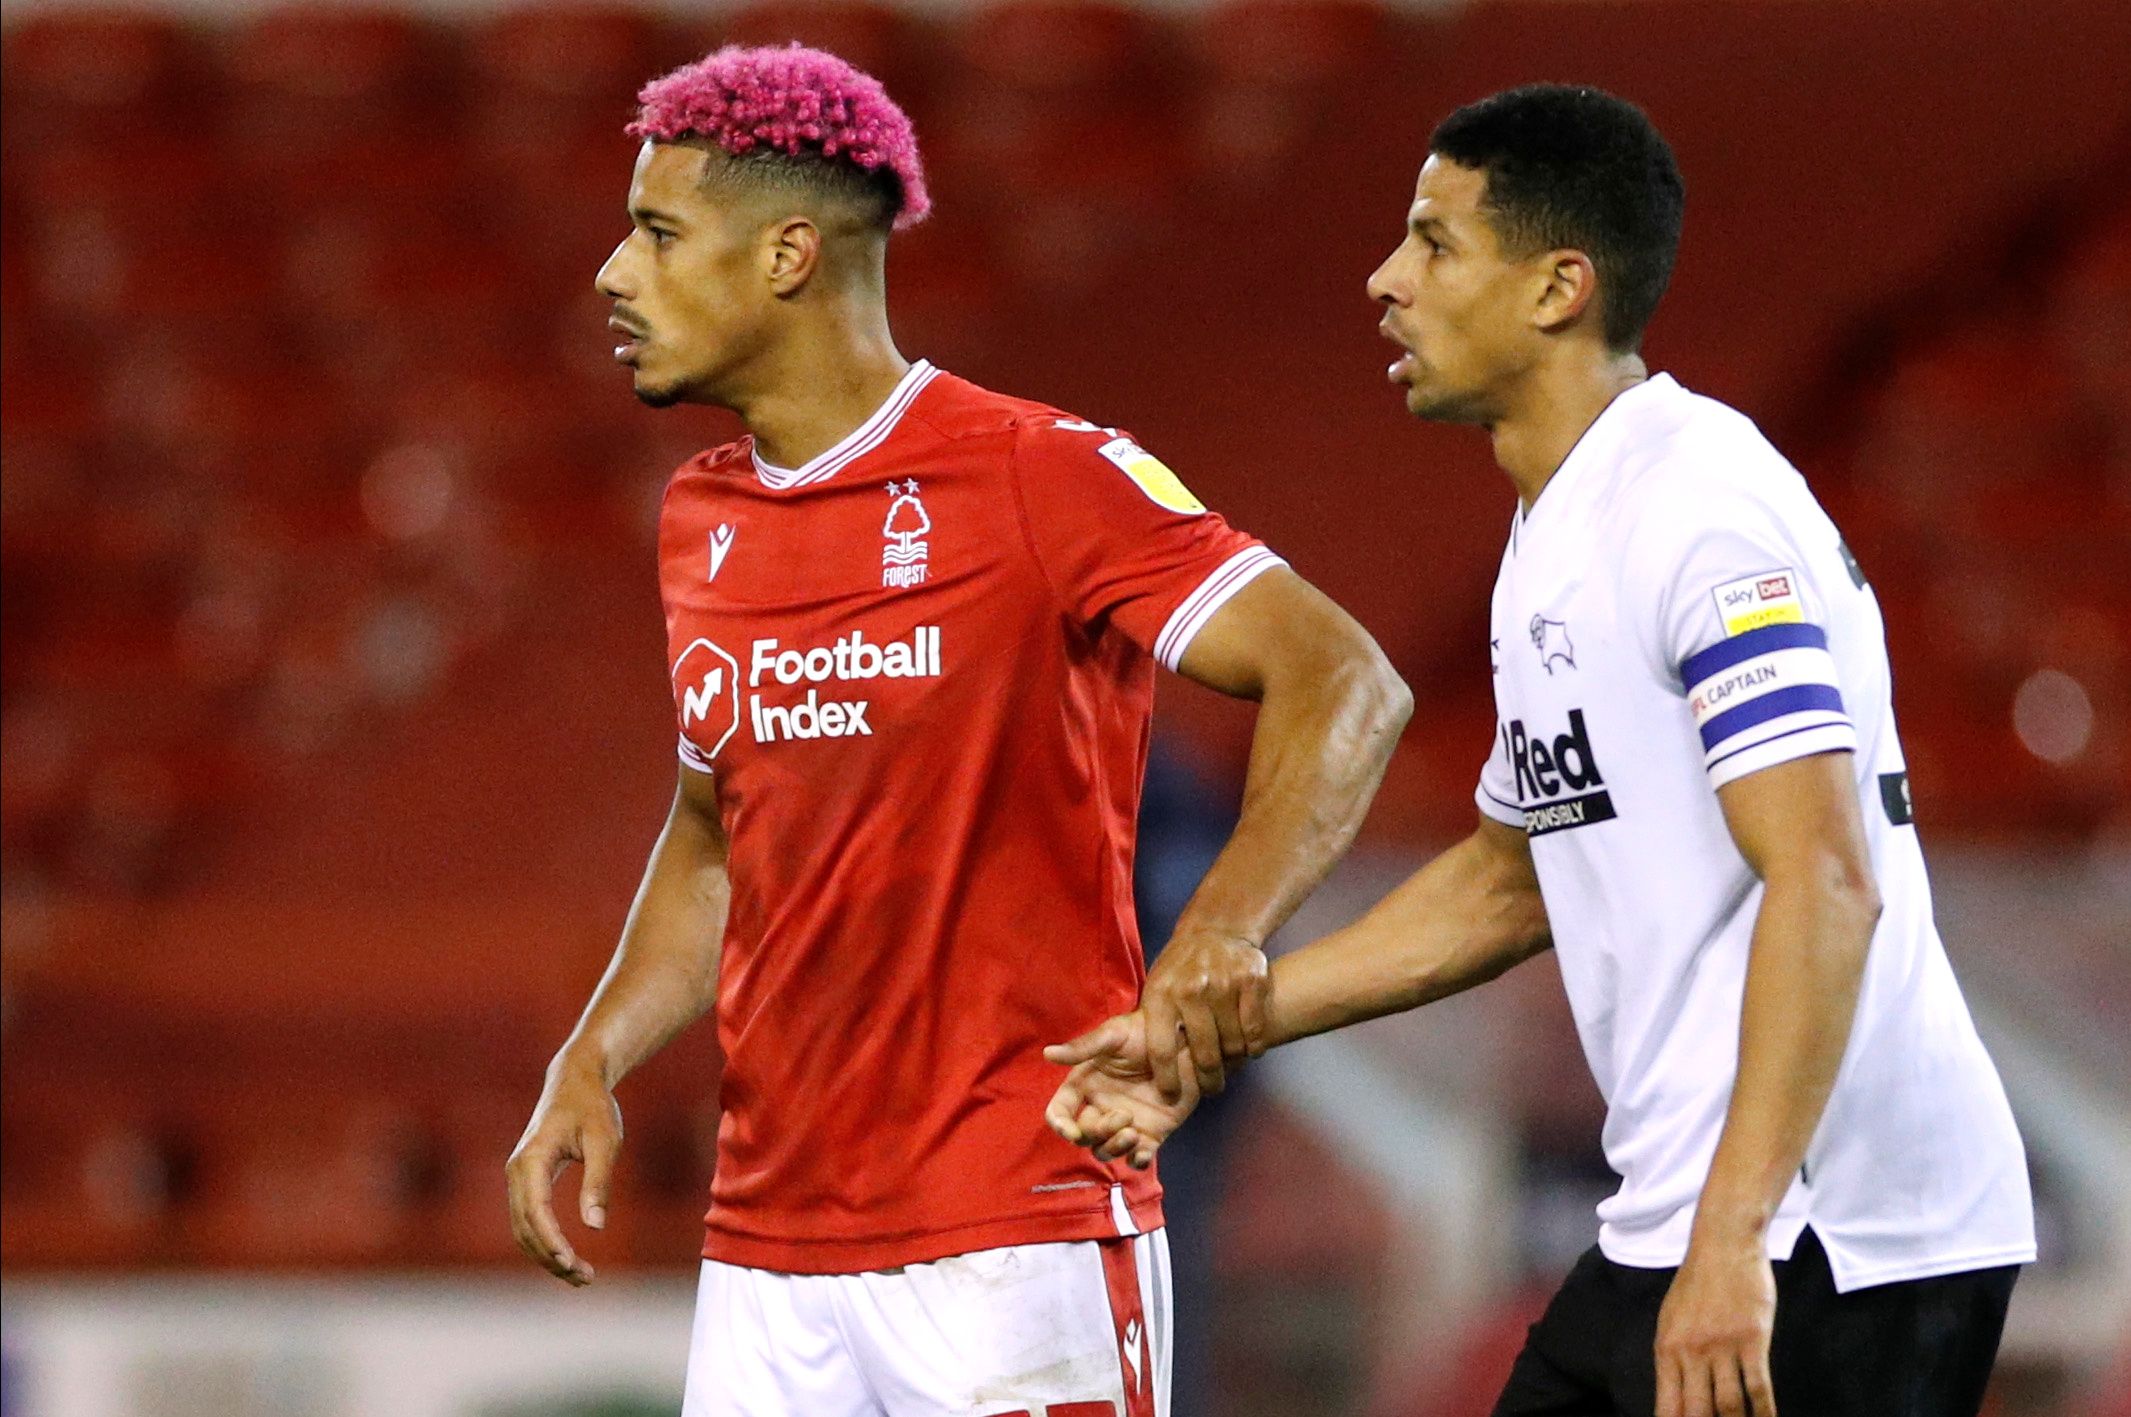 Soccer Football - Championship - Nottingham Forest v Derby County - The City Ground, Nottingham, Britain - October 23, 2020   Nottingham Forest's Lyle Taylor with Derby County's Curtis Davies during the match    Action Images/Andrew Boyers    EDITORIAL USE ONLY. No use with unauthorized audio, video, data, fixture lists, club/league logos or 